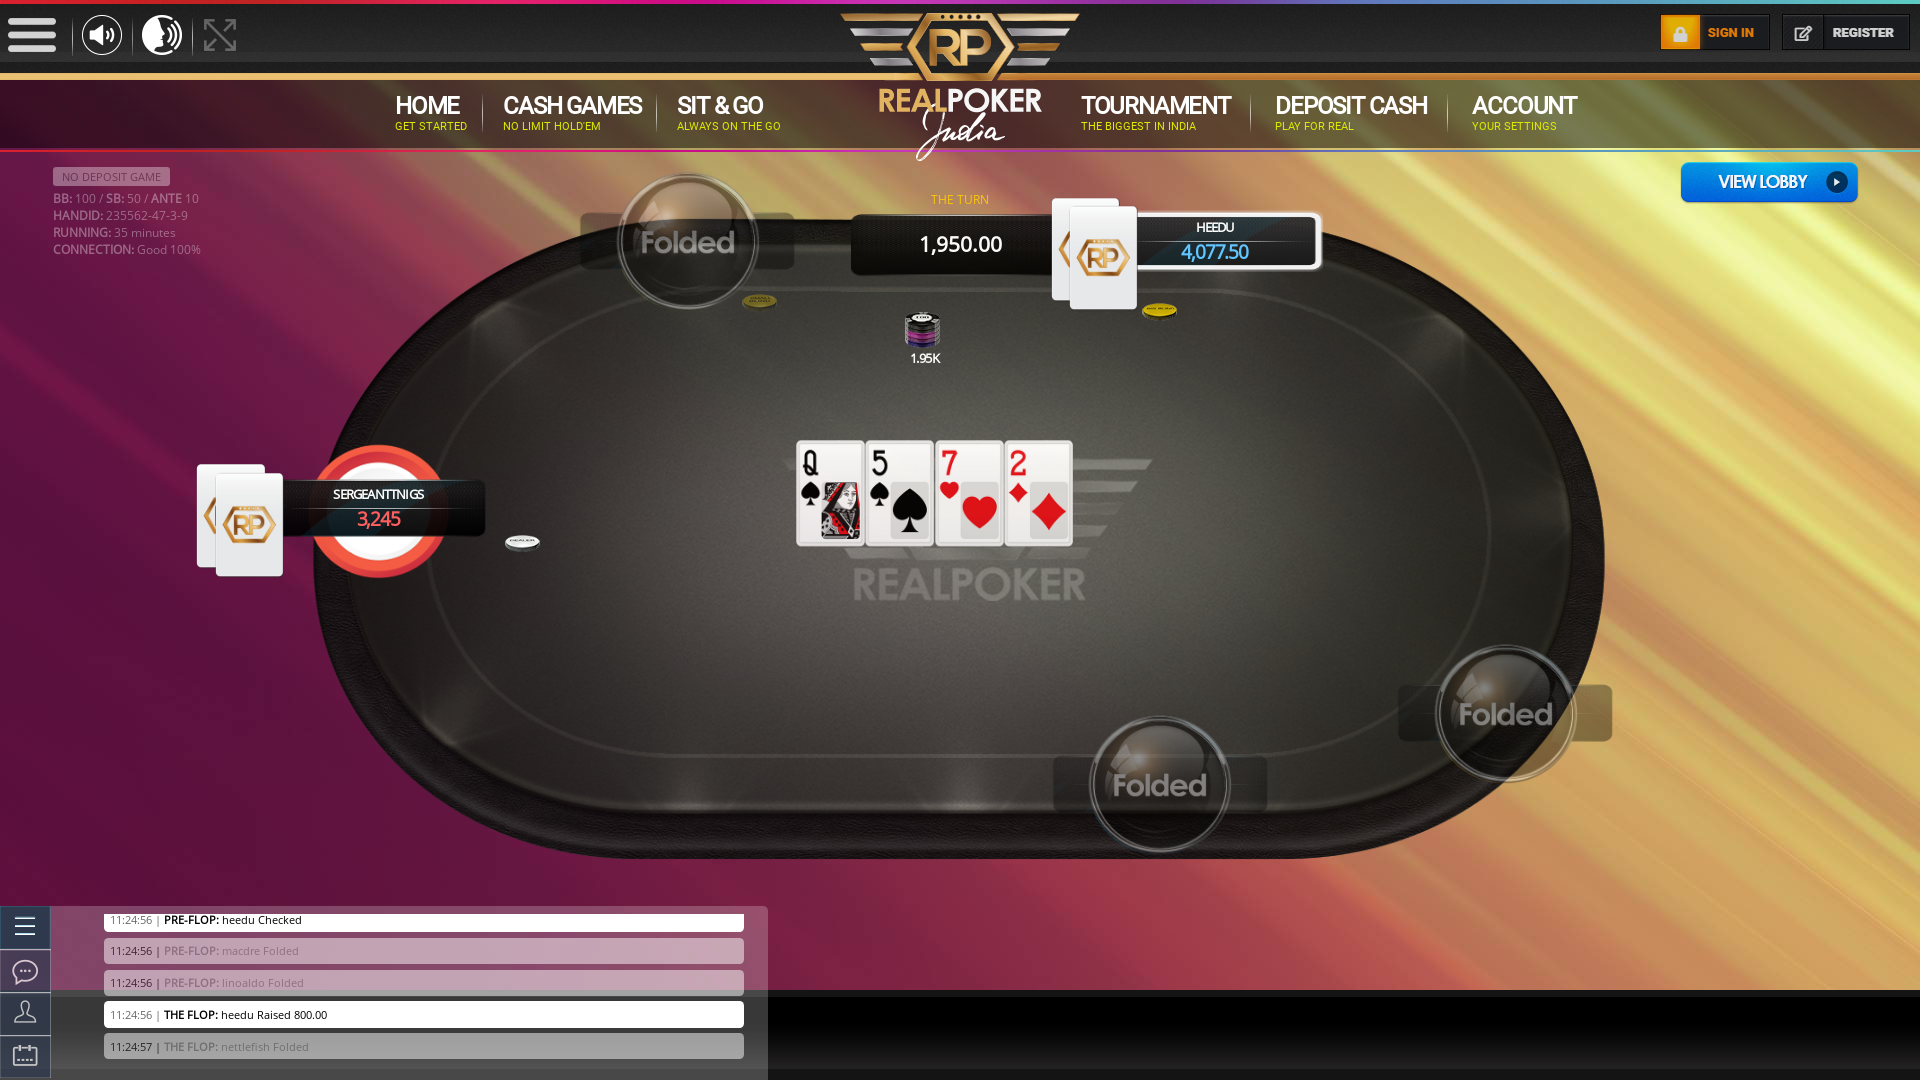 10 player poker in the 35th minute